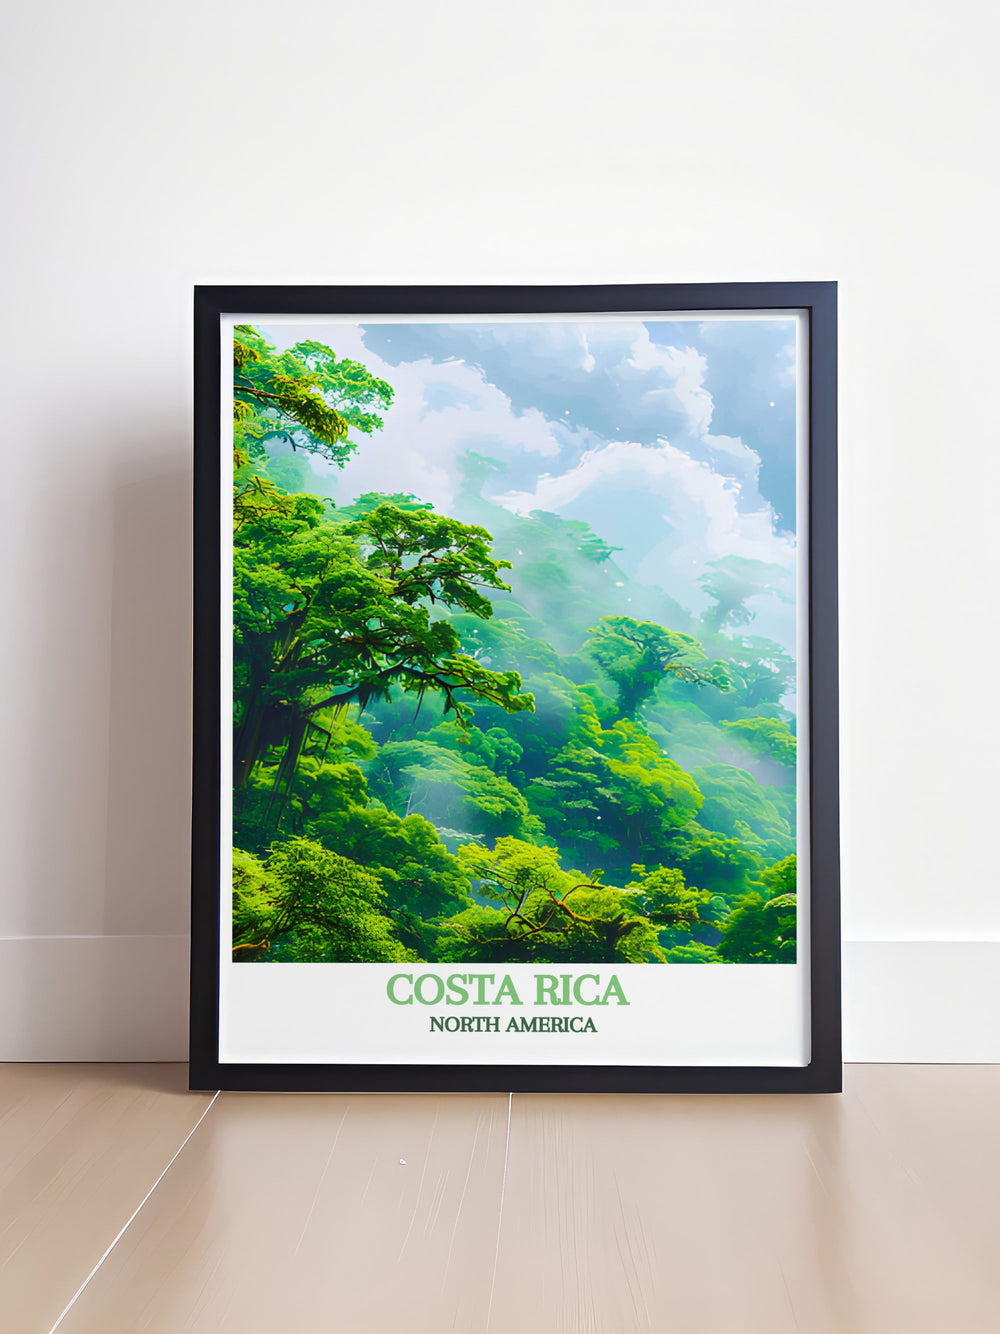 Captivating Costa Rica poster featuring the misty Monteverde Cloud Forest Reserve and the serene beaches of Saint Teresa, showcasing the natural beauty of Costa Rica. Perfect for adding a touch of tropical charm to your home decor.